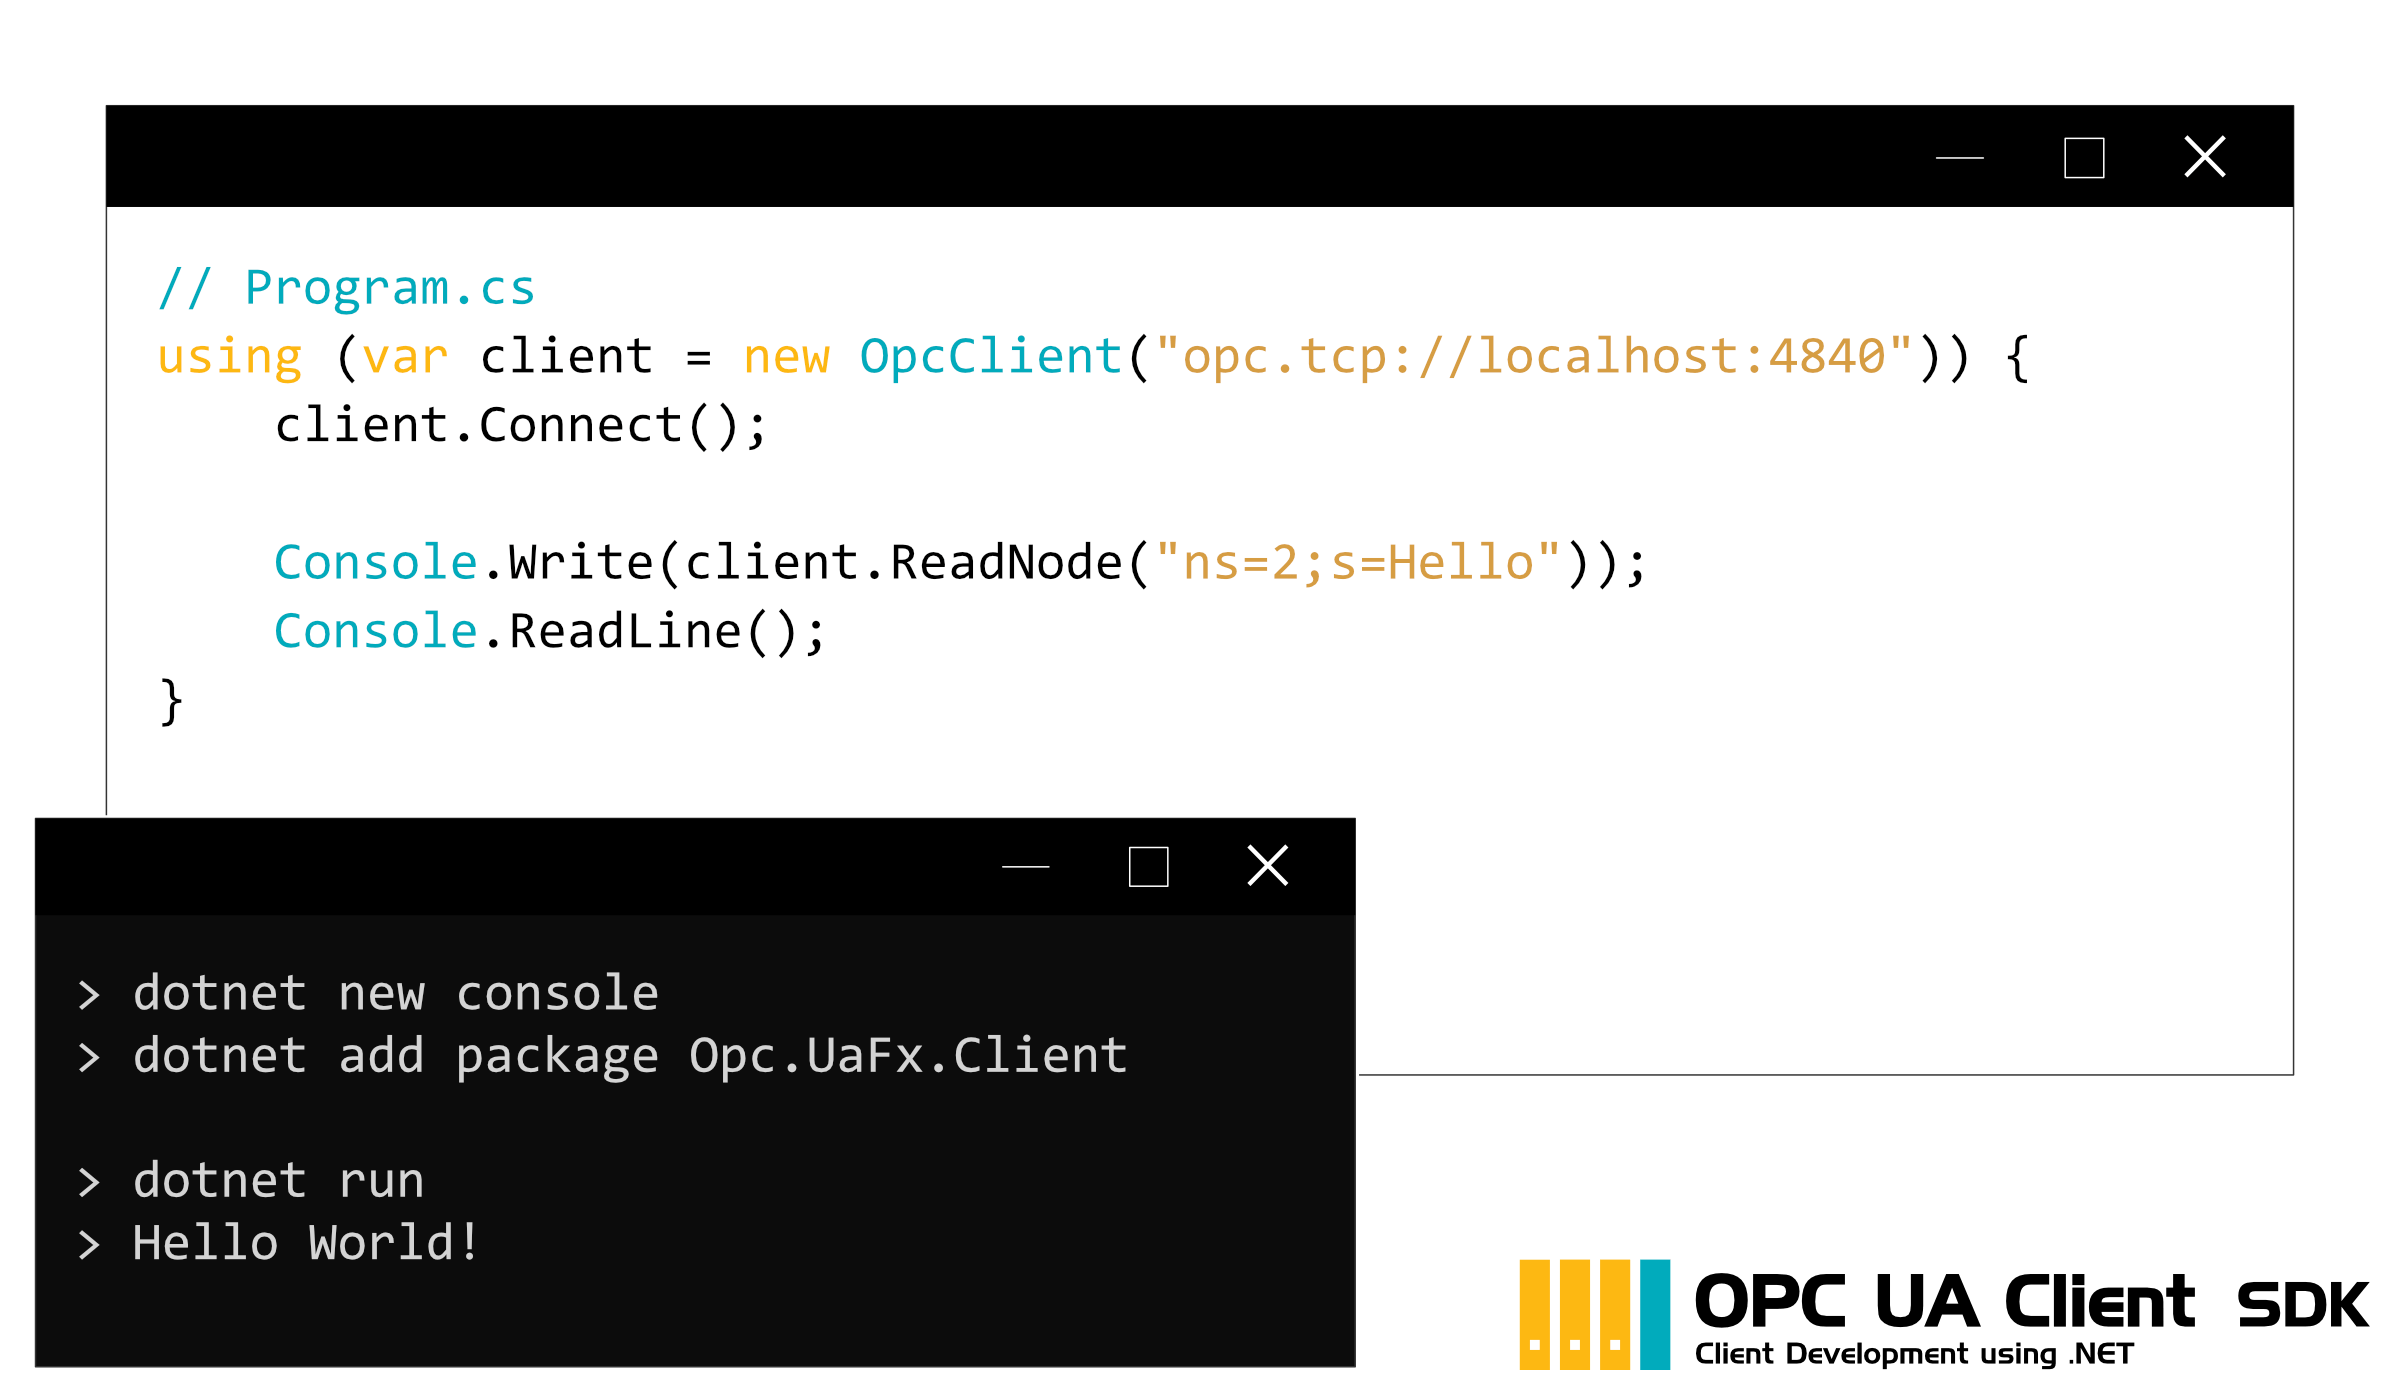 Code example for an OPC UA client that reads and outputs the values of a node.